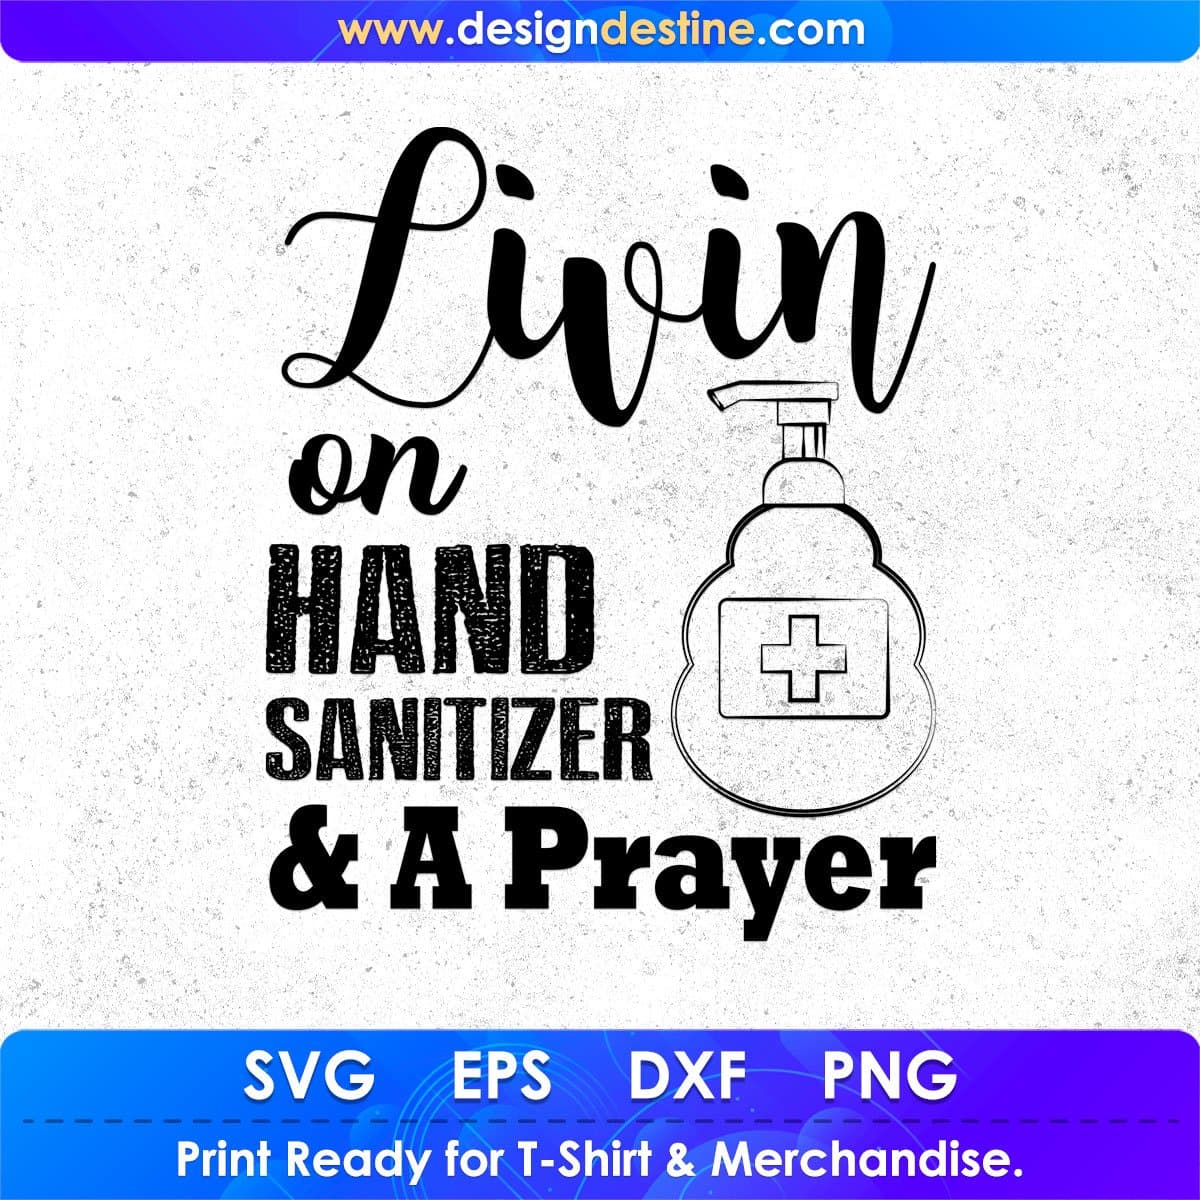 Livin On Hand Sanitizer A Prayer Quotes T shirt Design In Png Svg Cutting Printable Files